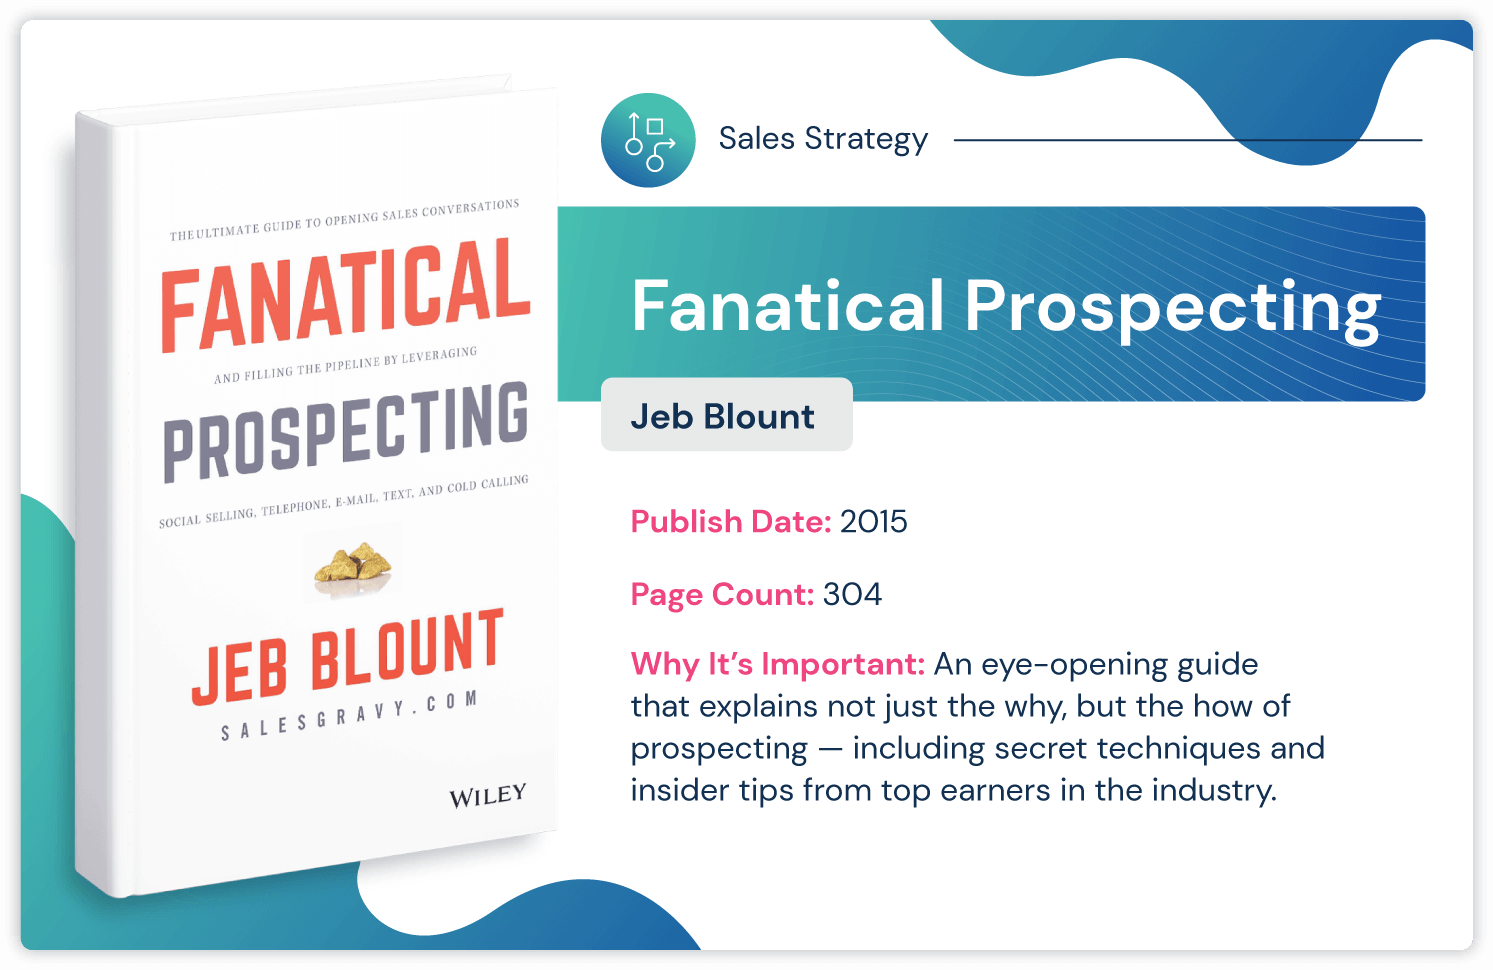 Sales strategy book "Fanatical Prospecting" by Jeb Blount about insider prospecting tips published in 2015 and 304 pages